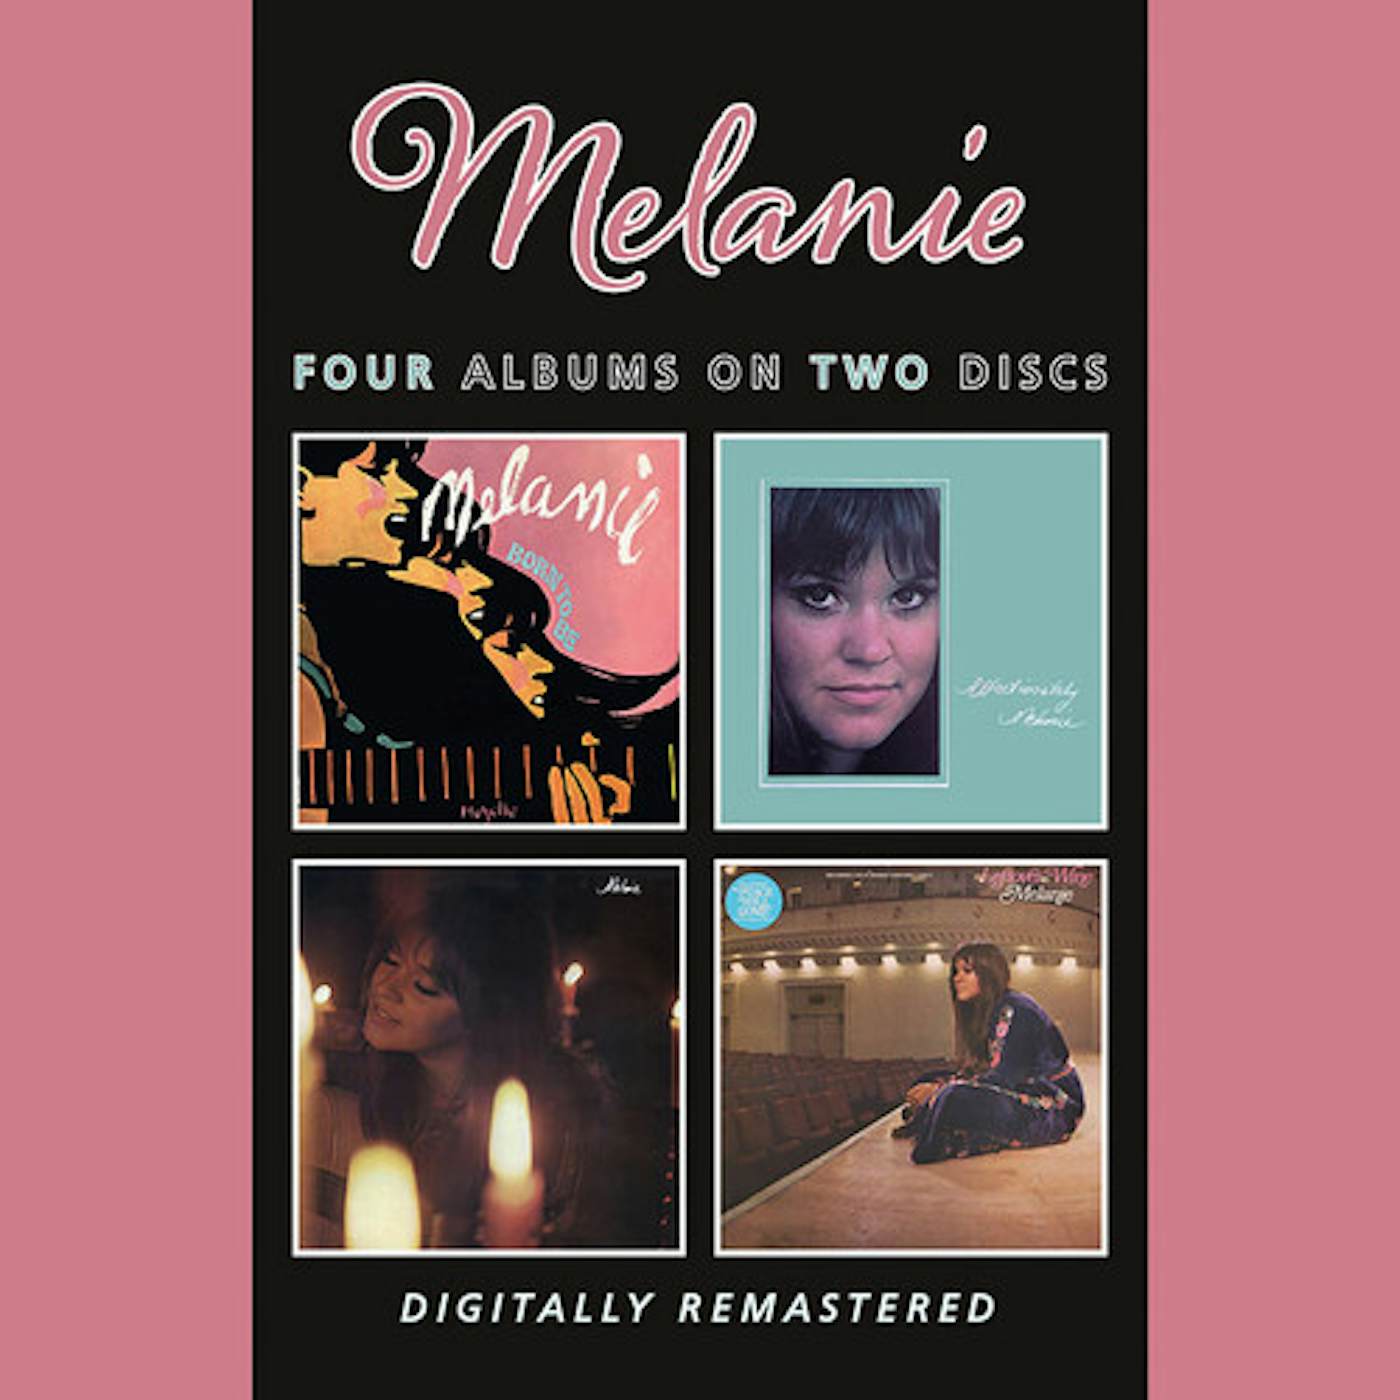 BORN TO BE / AFFECTIONATELY MELANIE / CANDLES IN CD